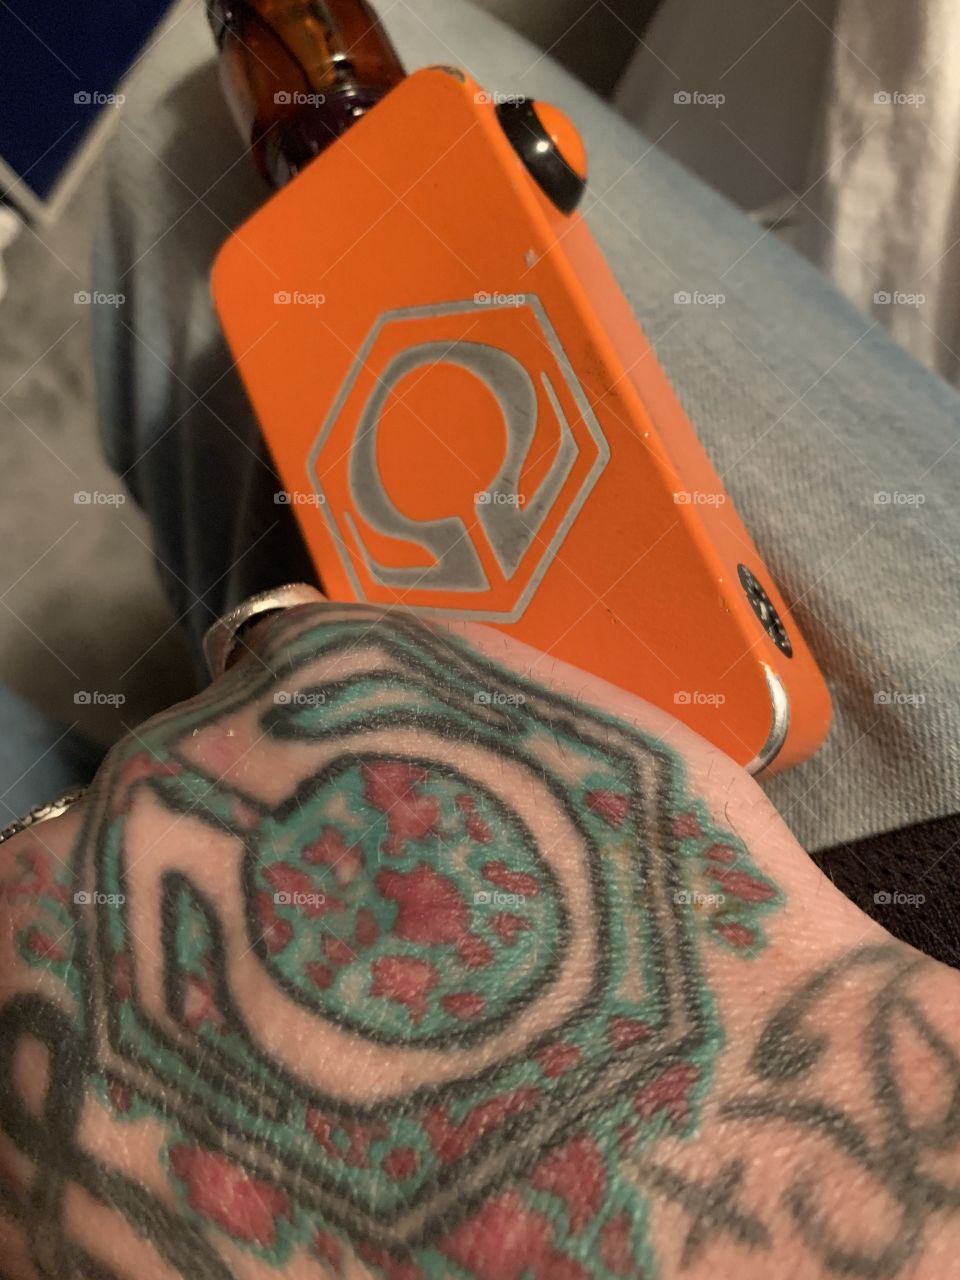 Showing my matching vape mod and hand tattoo. Been vaping for six years now helped me quit smoking from a pack a day. This is a hexohm one of the best mods out there. 